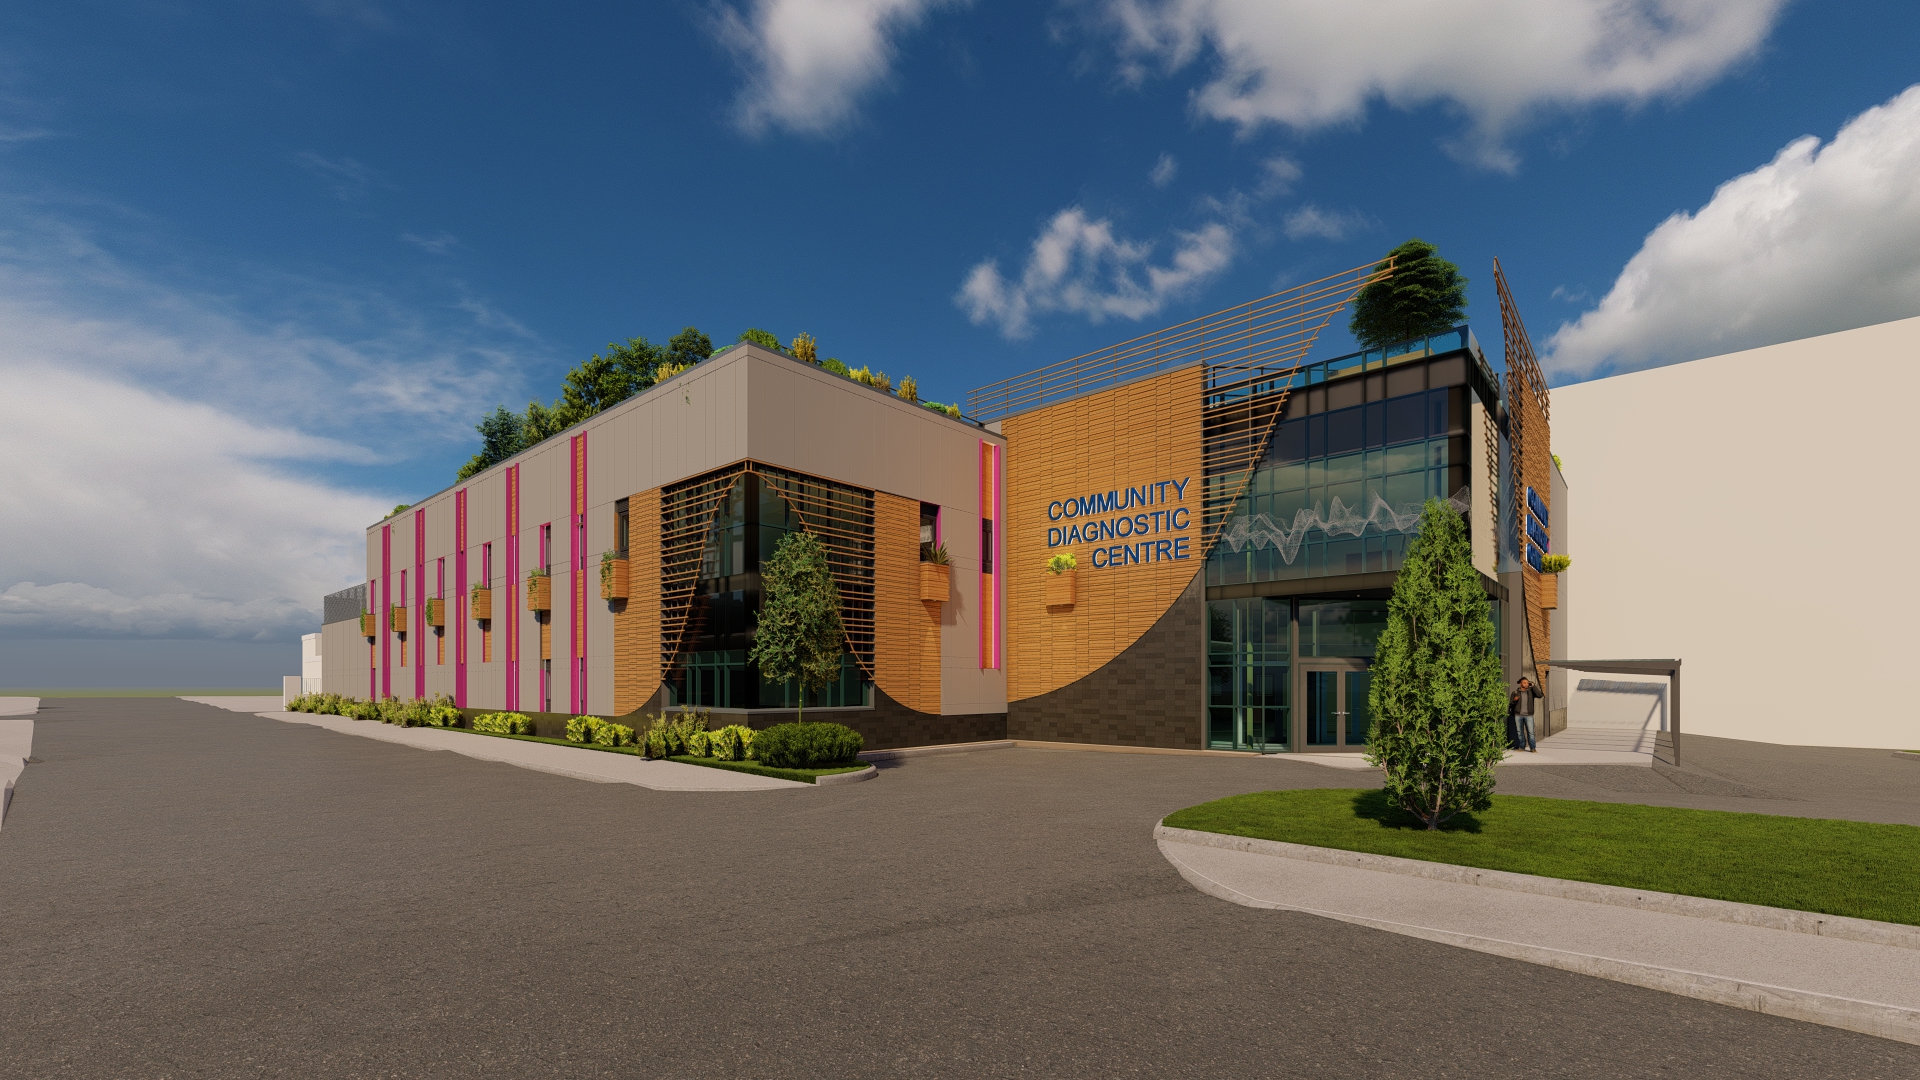 Planning approval for community diagnostic centre in Scunthorpe town centre